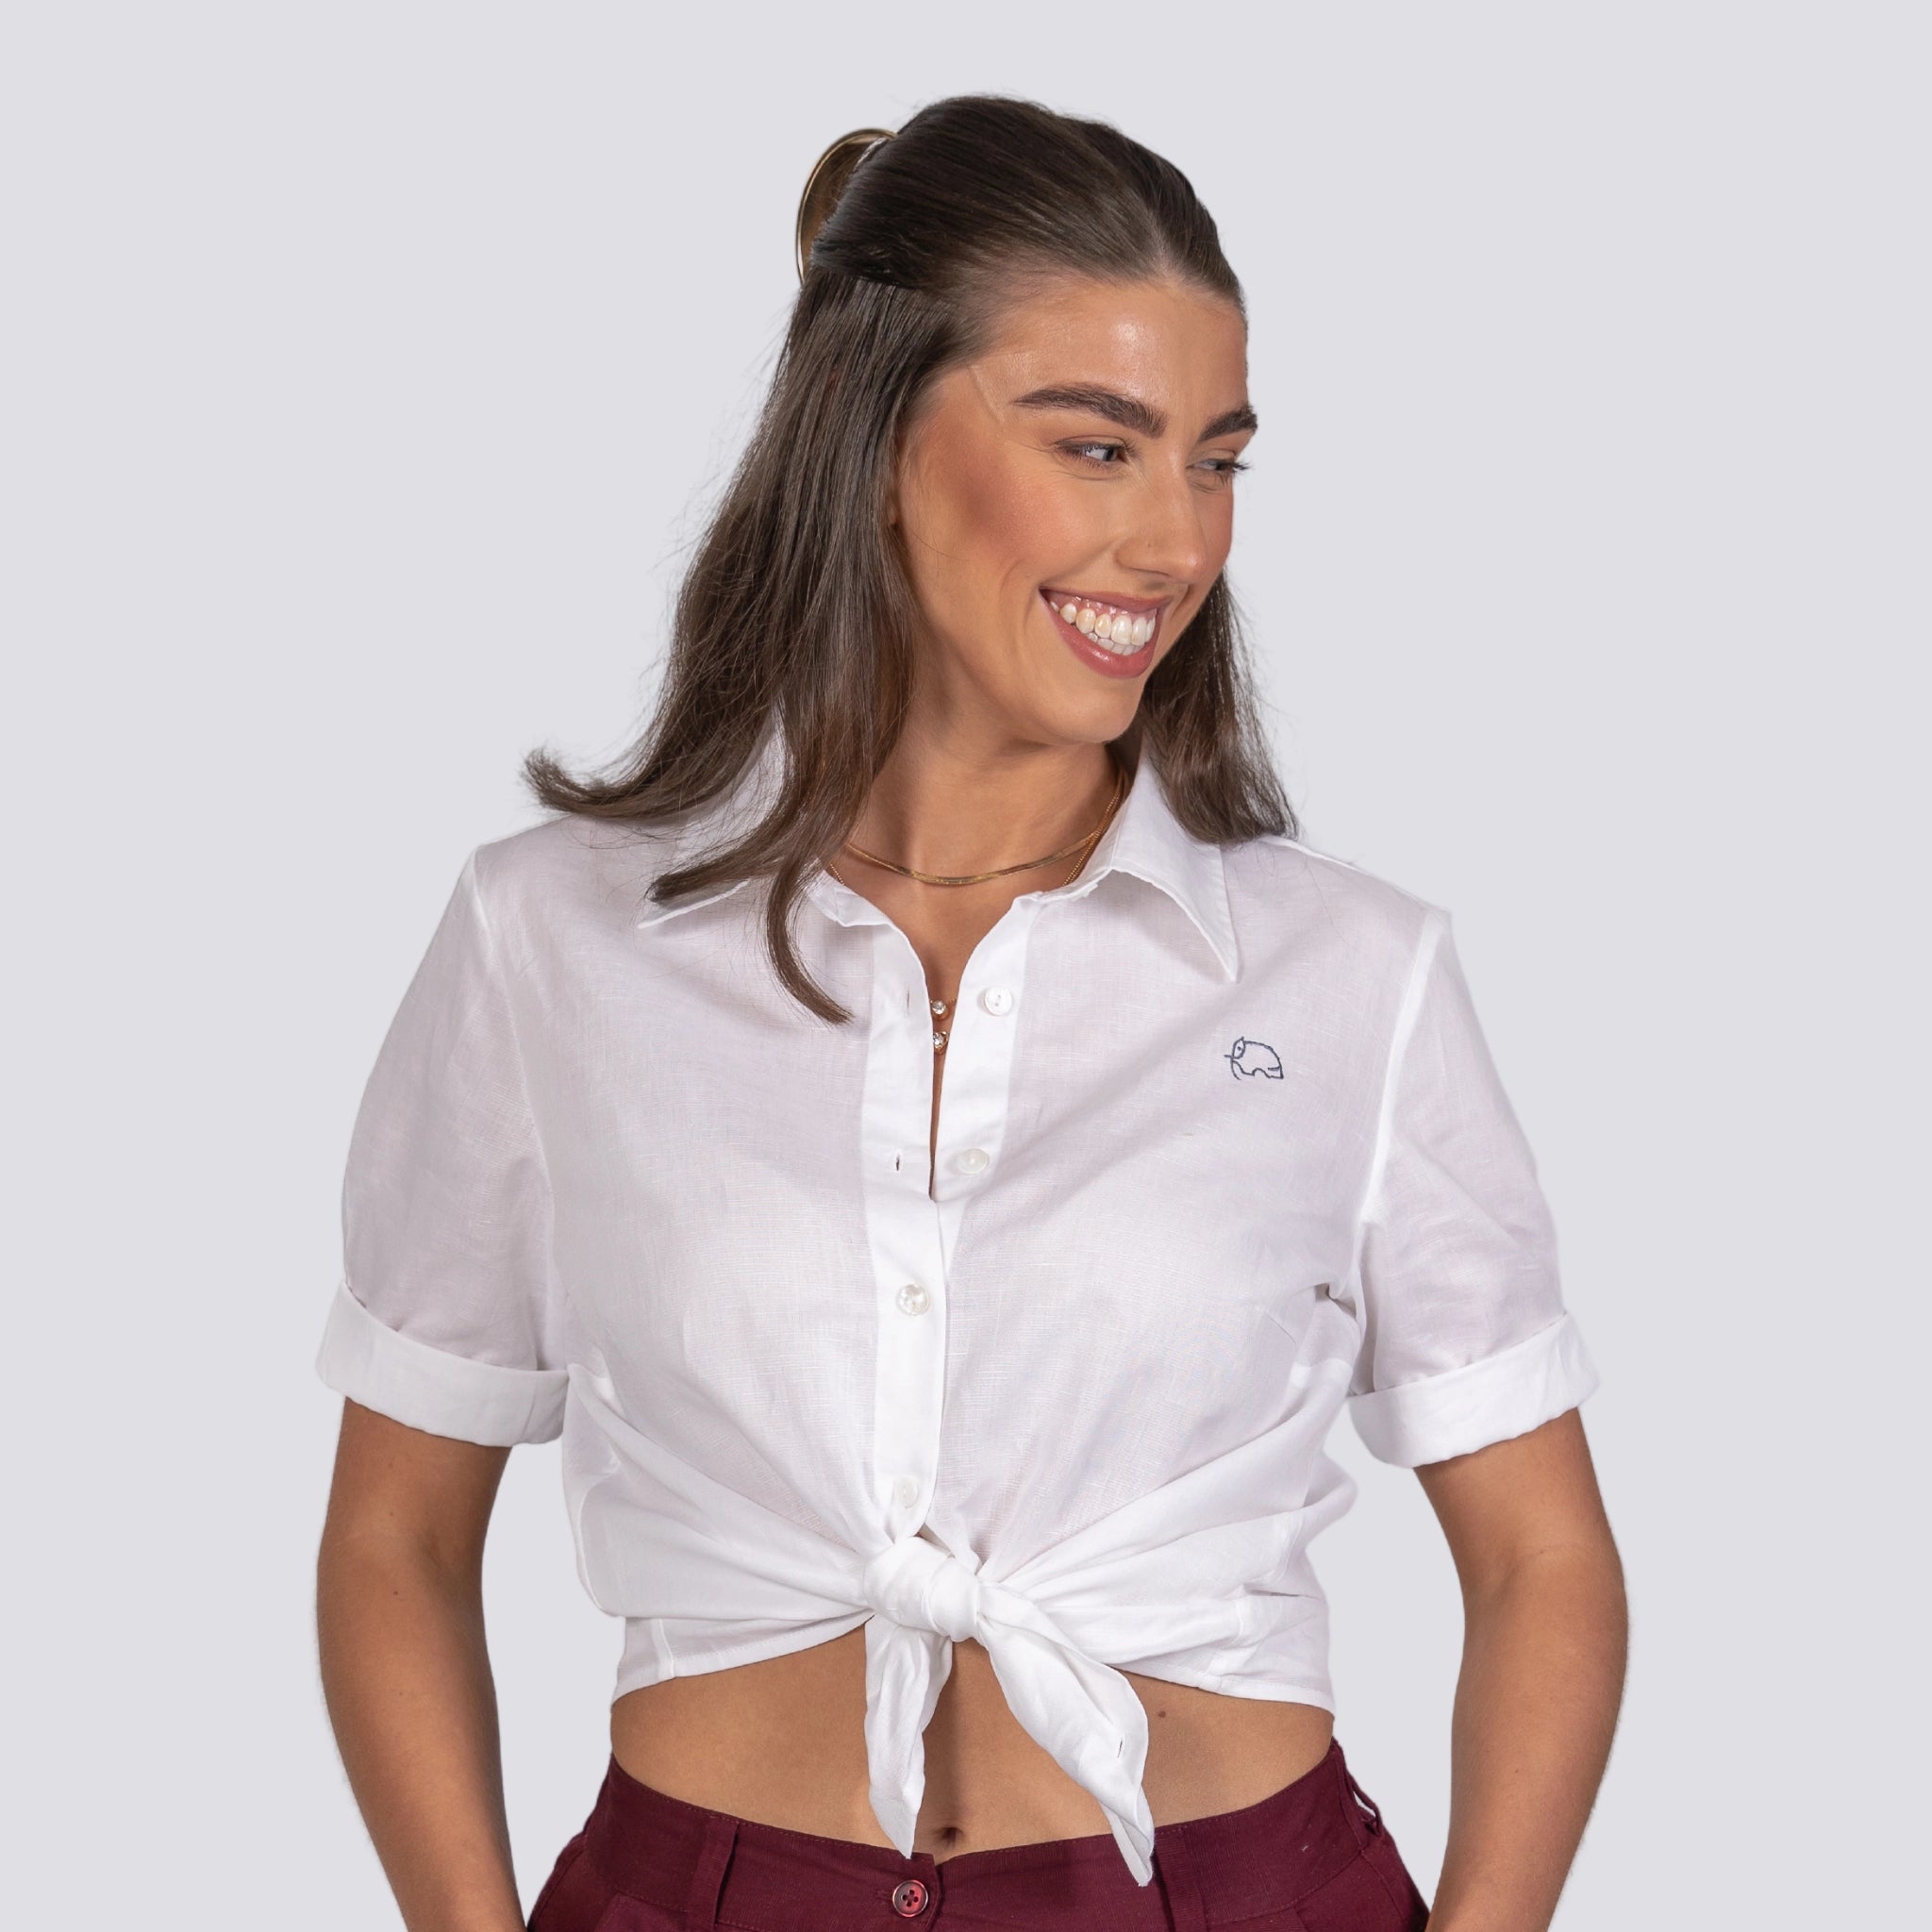 Woman smiling, wearing a knotted Karee Pure Elegance White Linen Cotton Shirt and maroon pants, with a minimalist necklace, against a gray background.